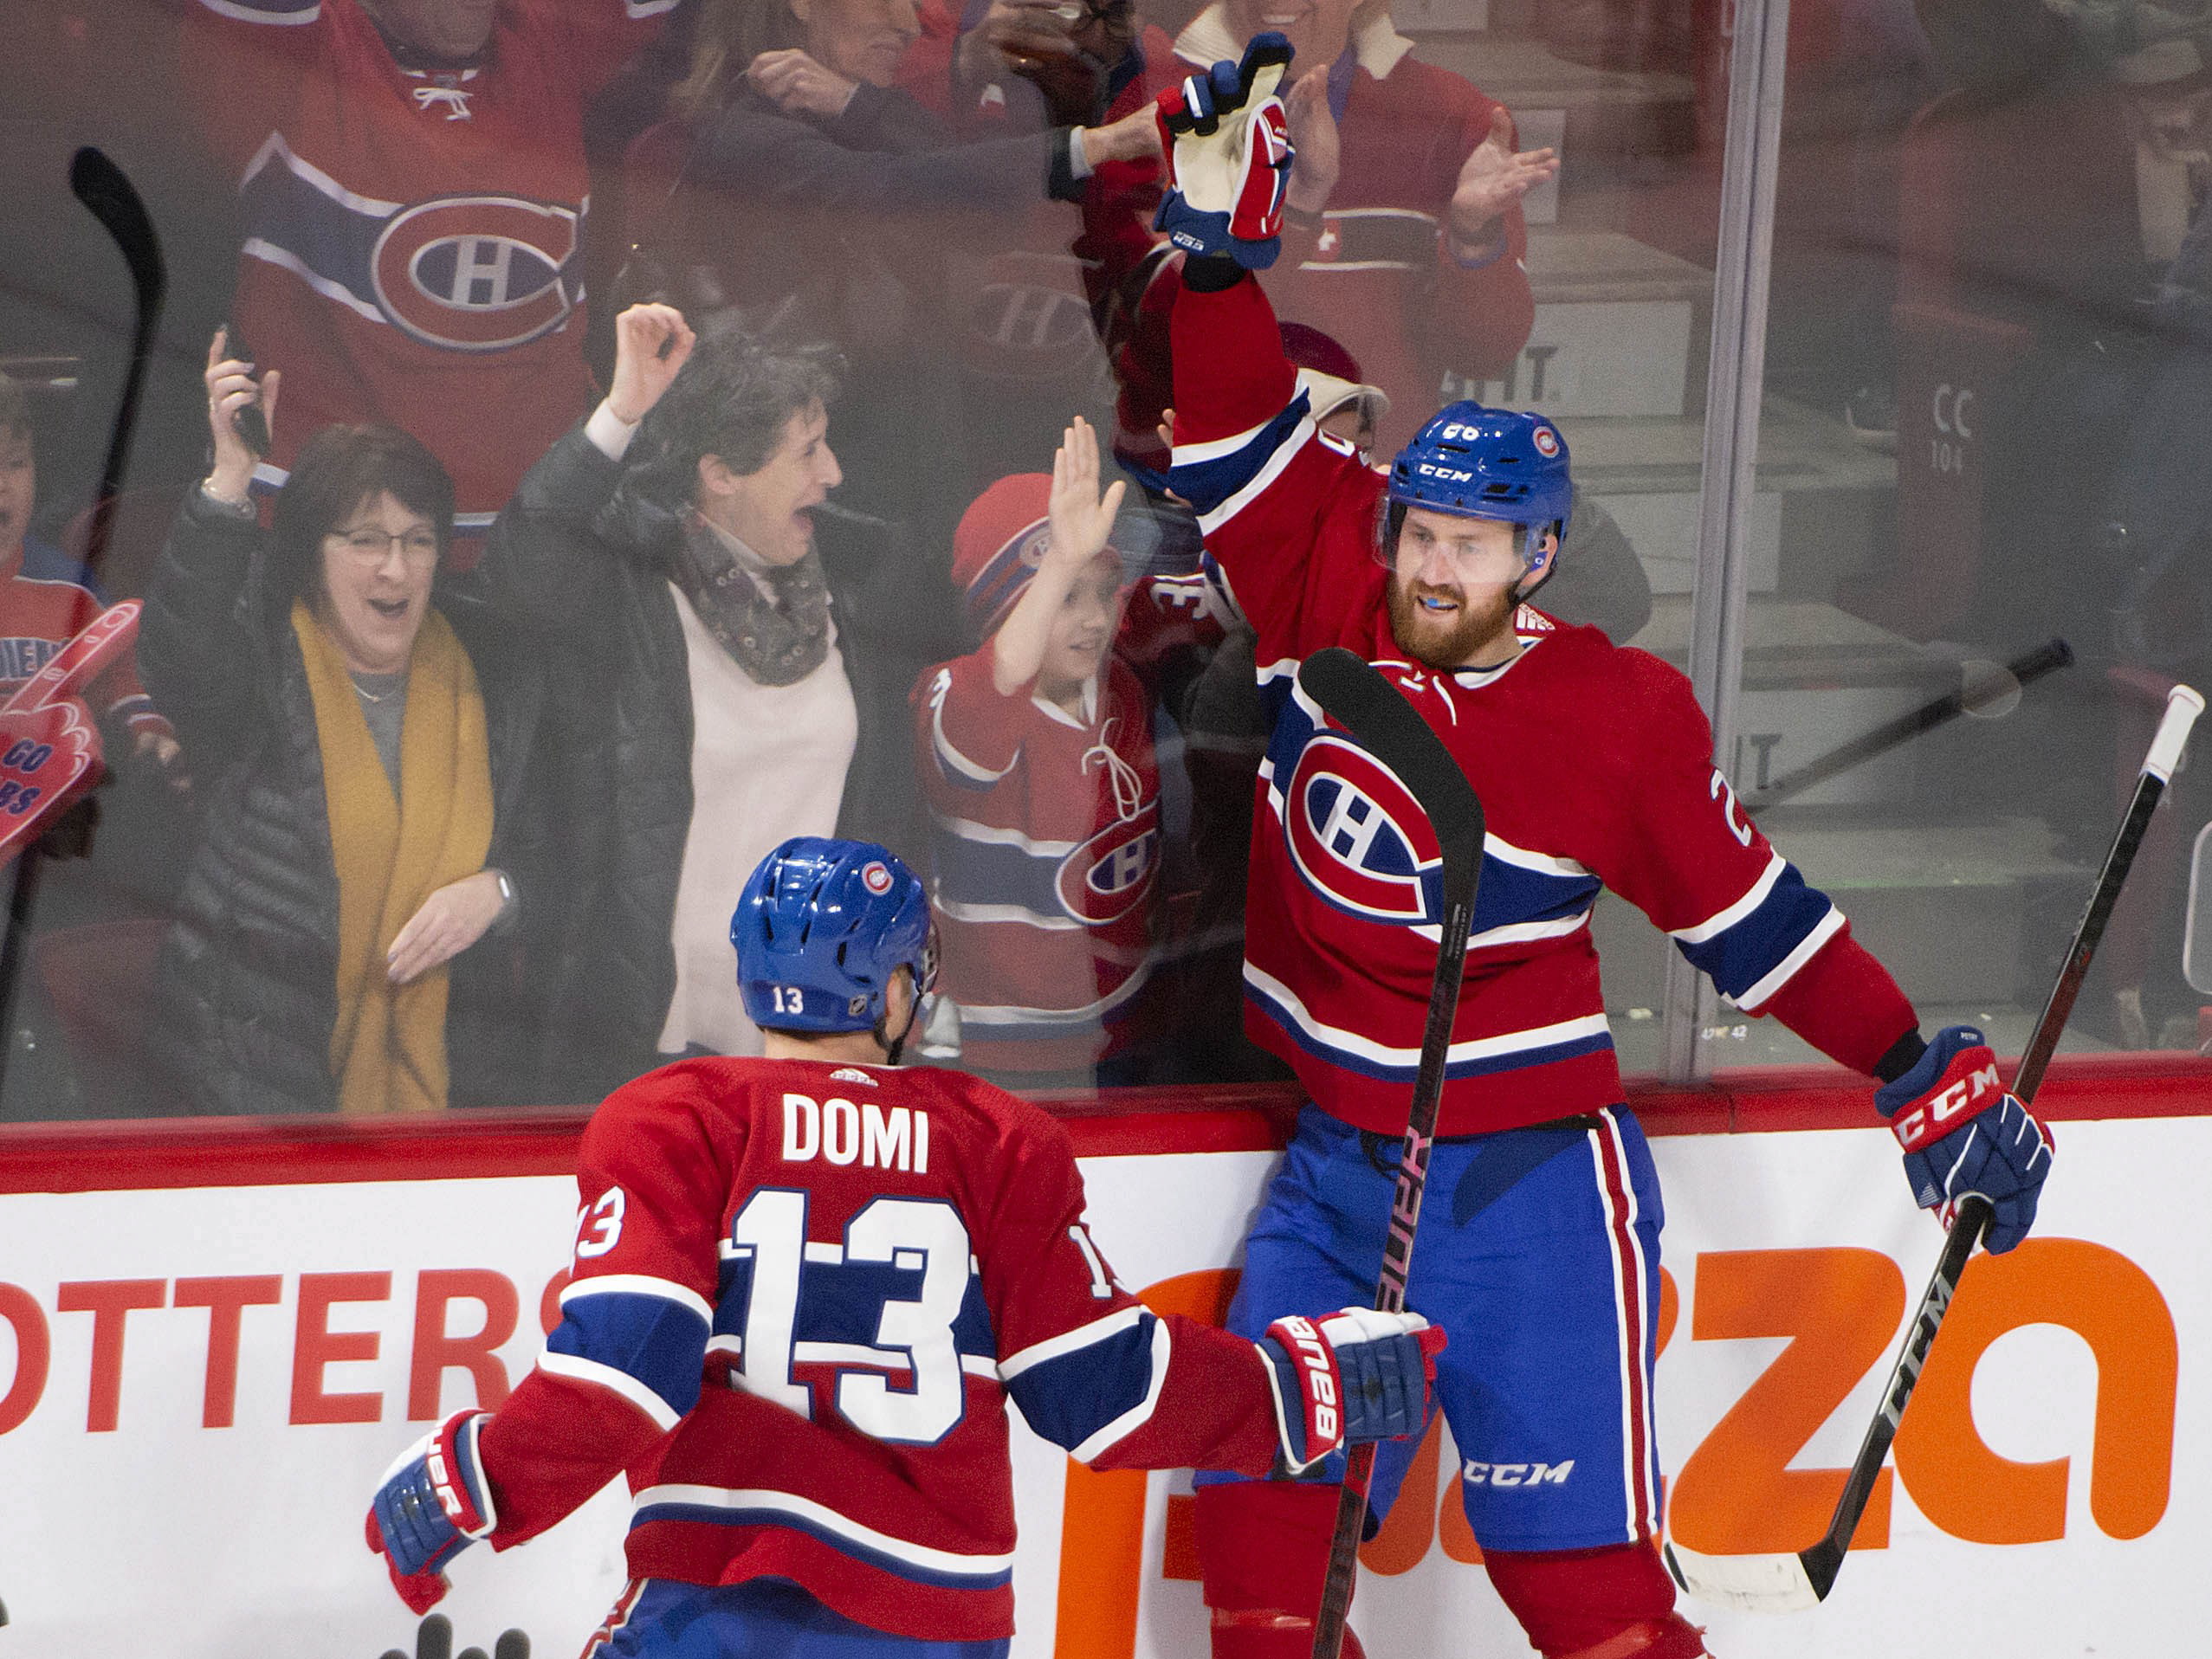 Montreal Canadiens: The possibilities for Max Domi's new number